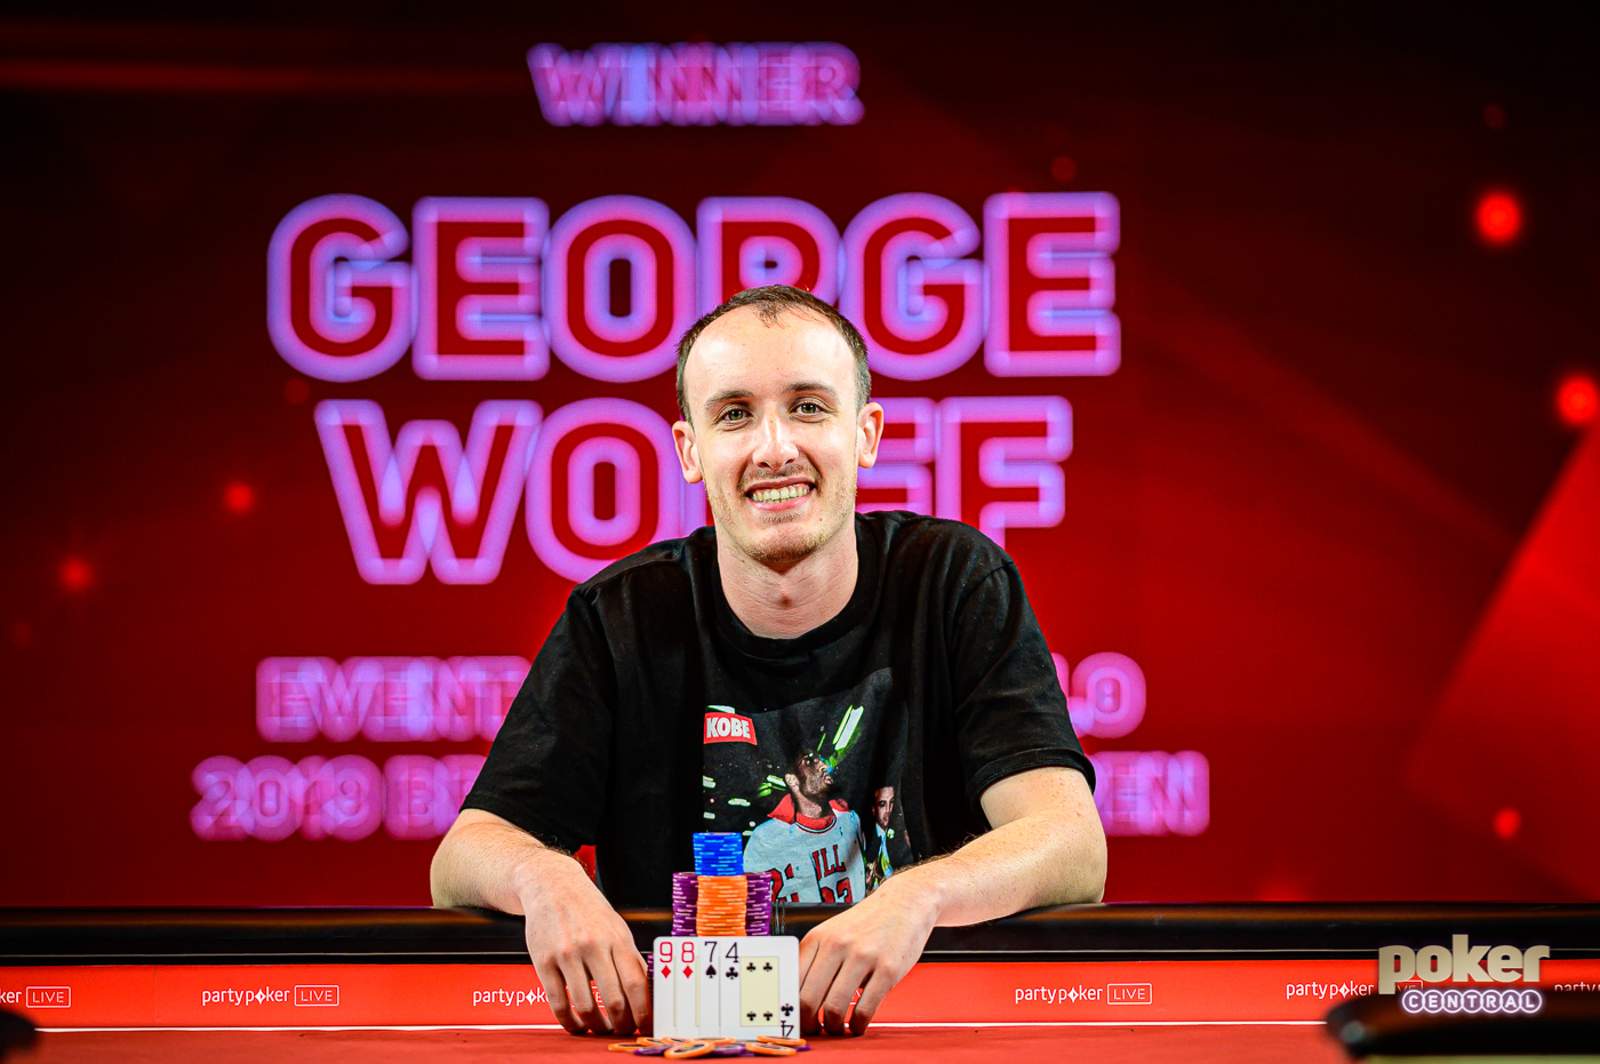 George Wolff Wins British Poker Open Pot Limit Omaha Event #2 for £120,000